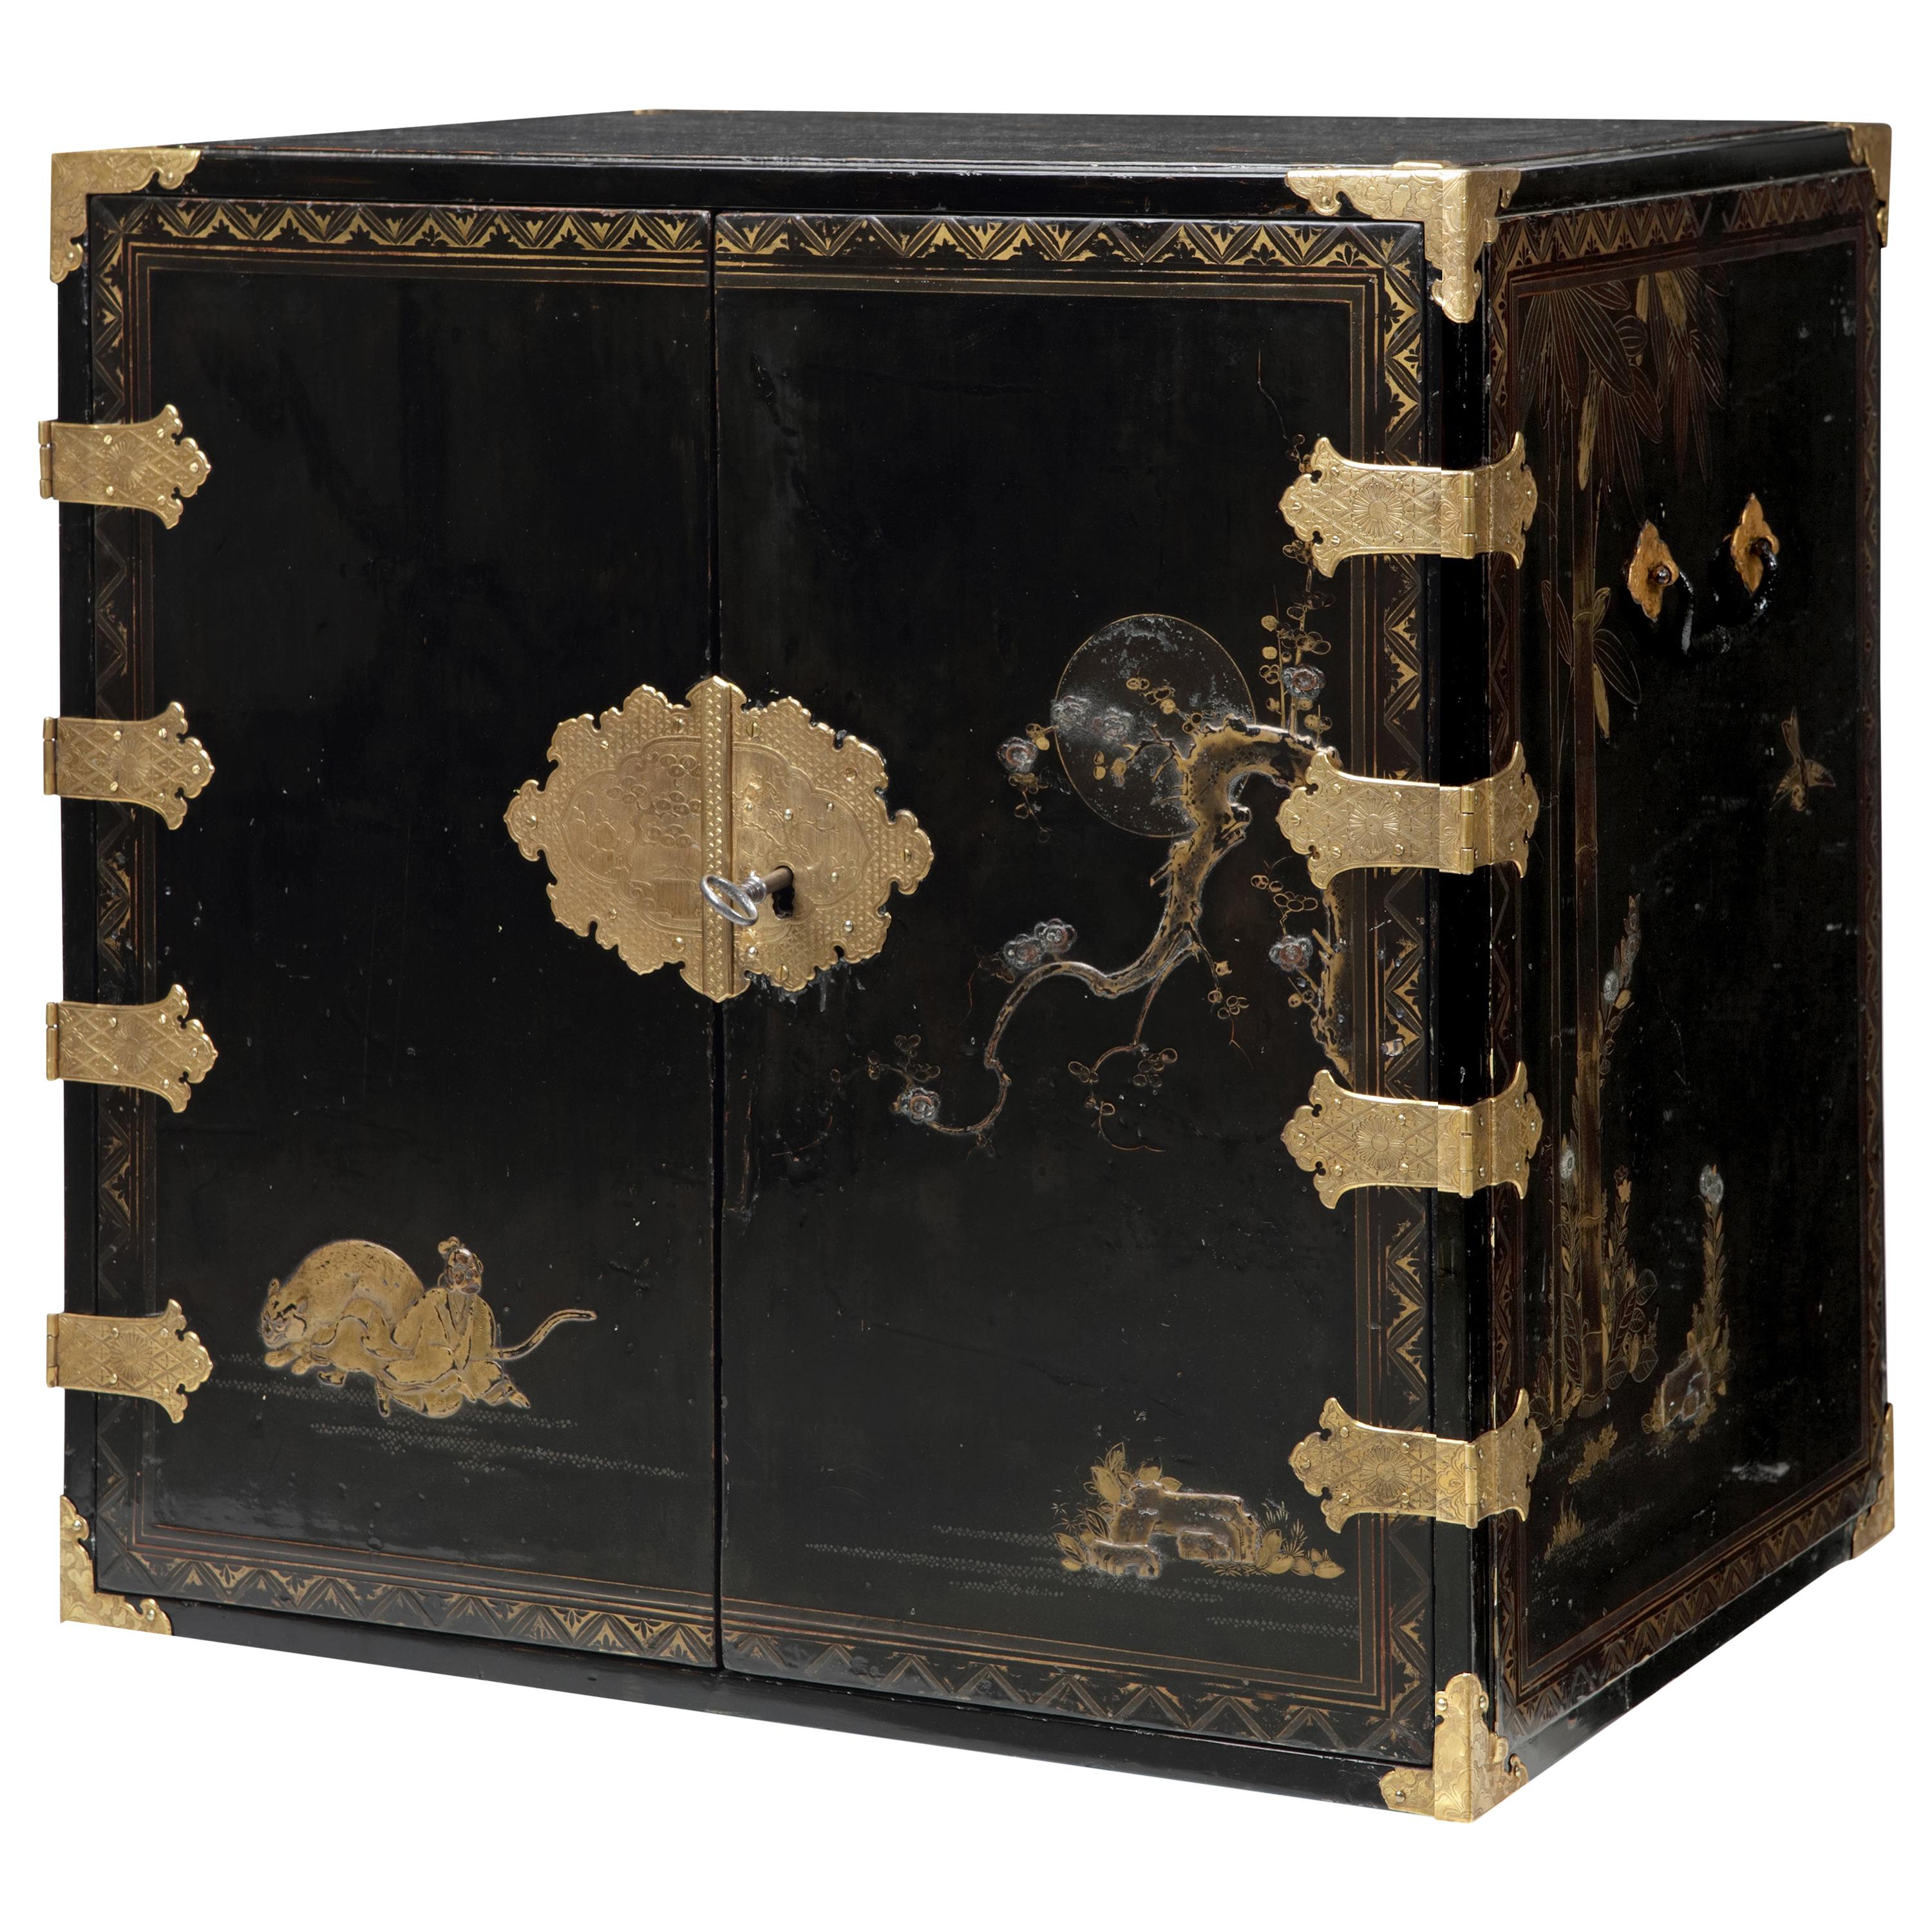 Rare Charming 17th Century Japanese Lacquer Cabinet with Gilt-Bronze Mounts